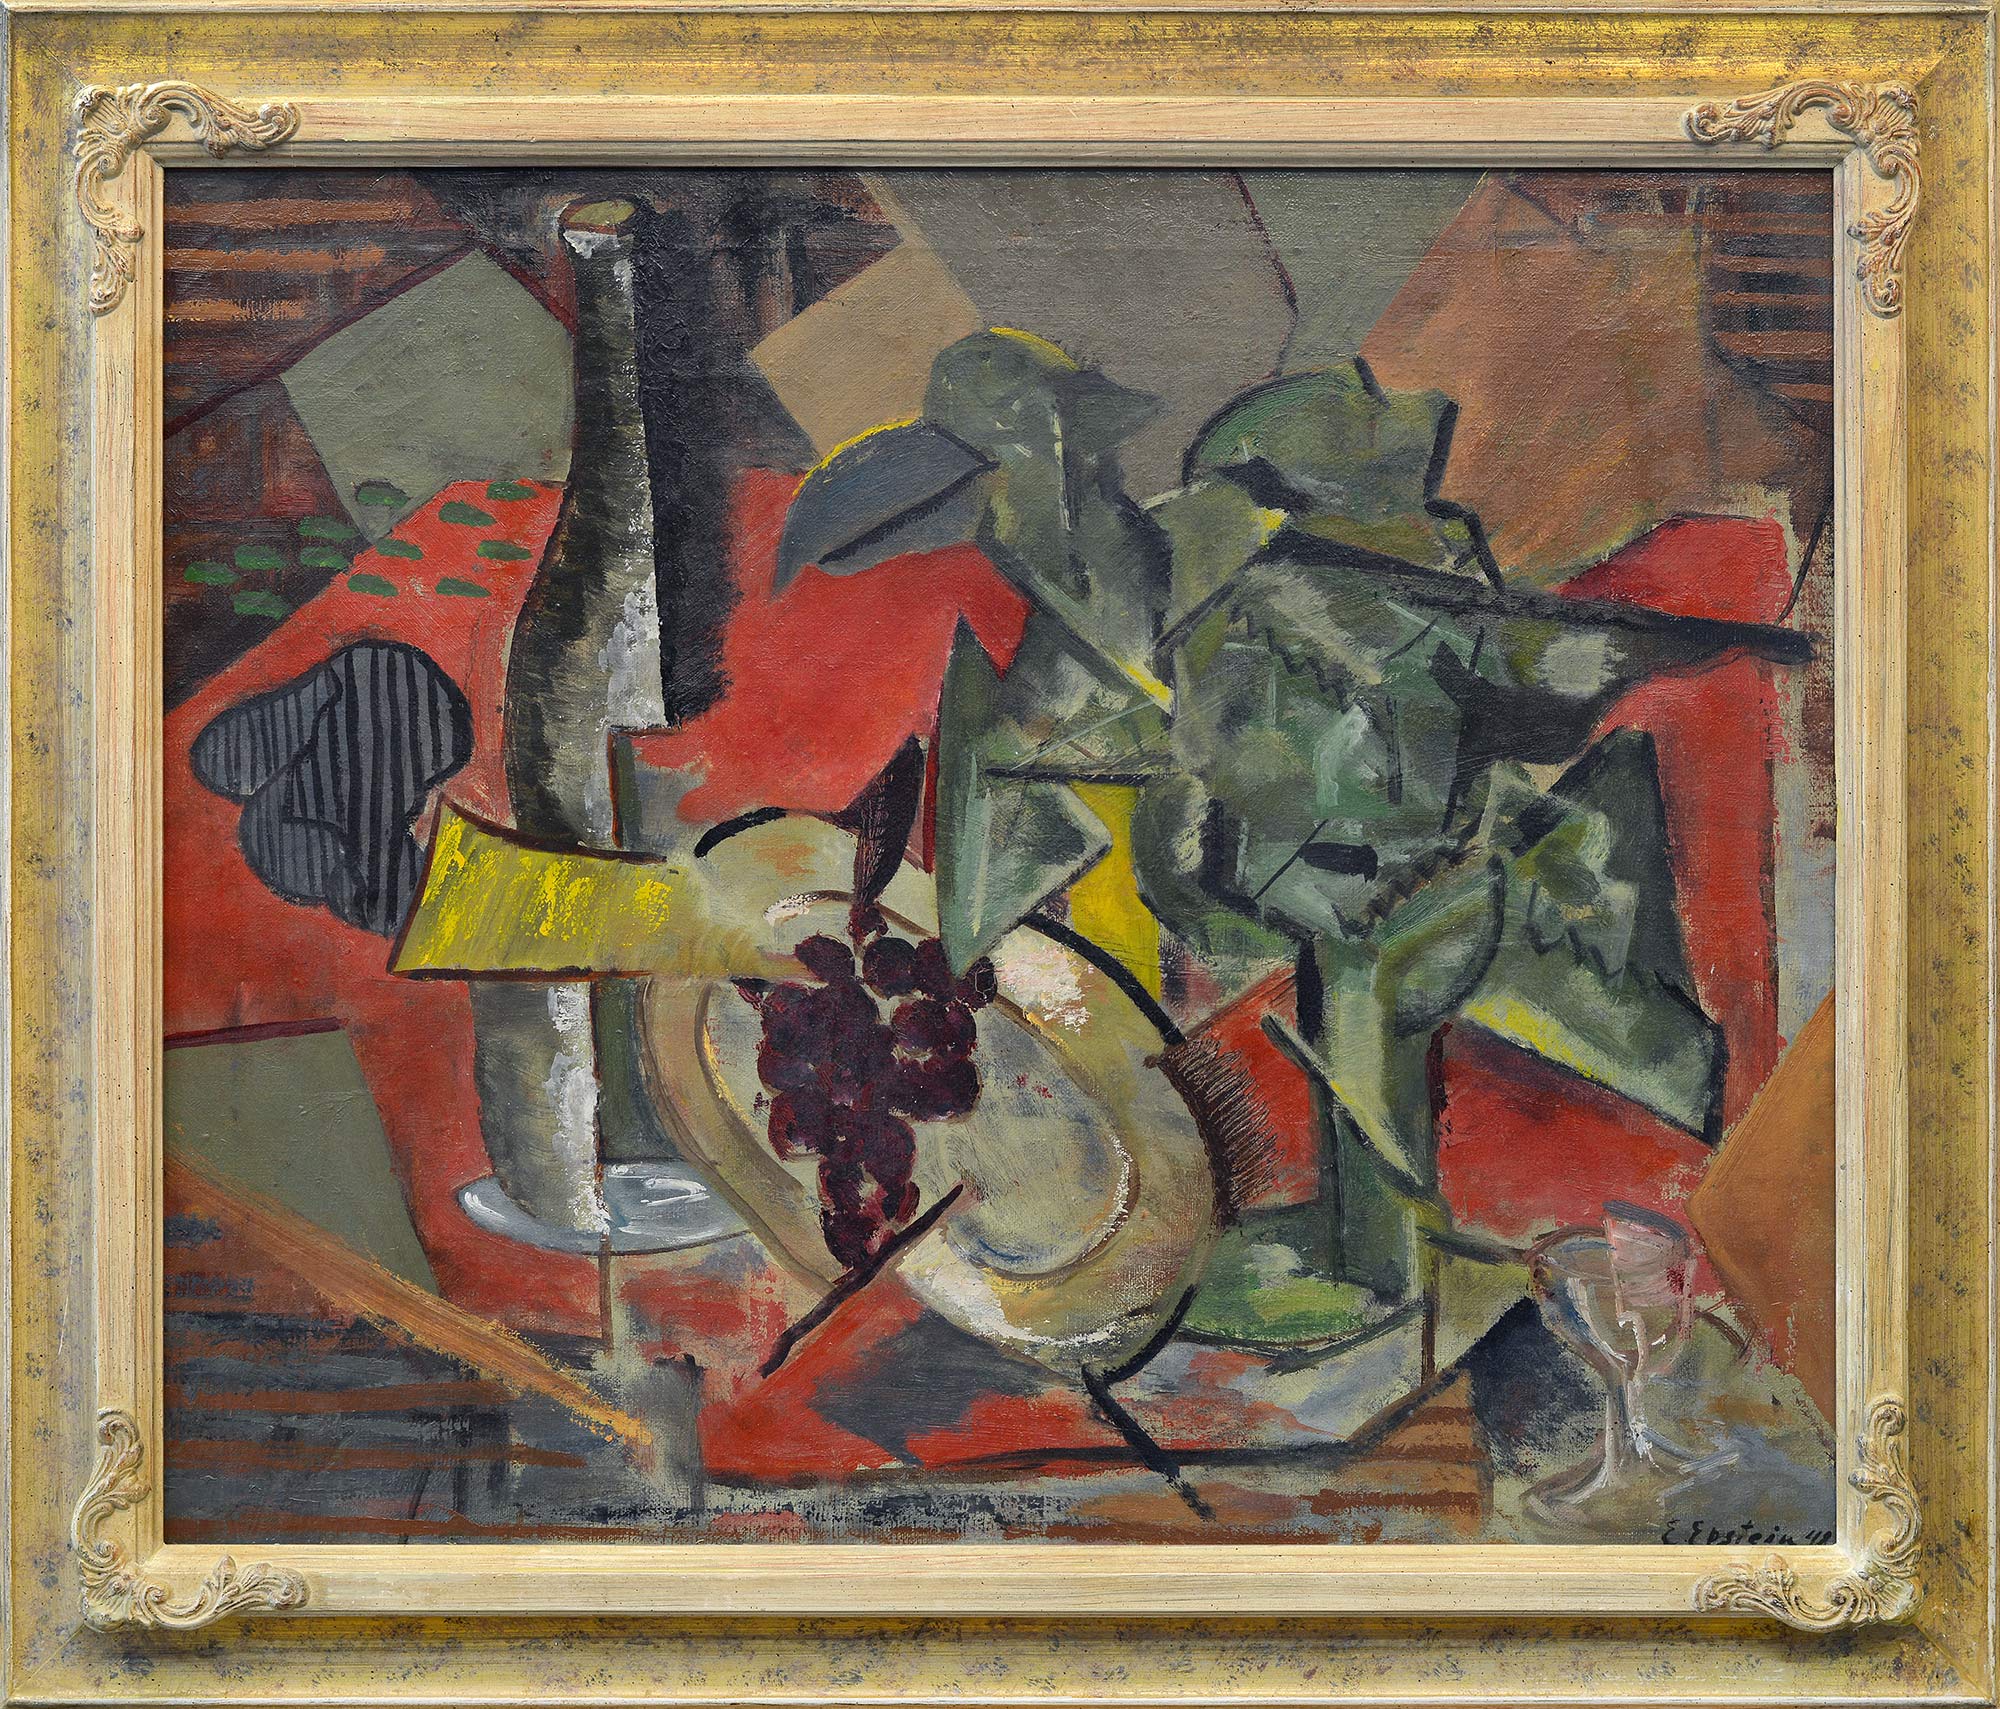 "Cubist still life with a bottle and grapes", 1948 - 1